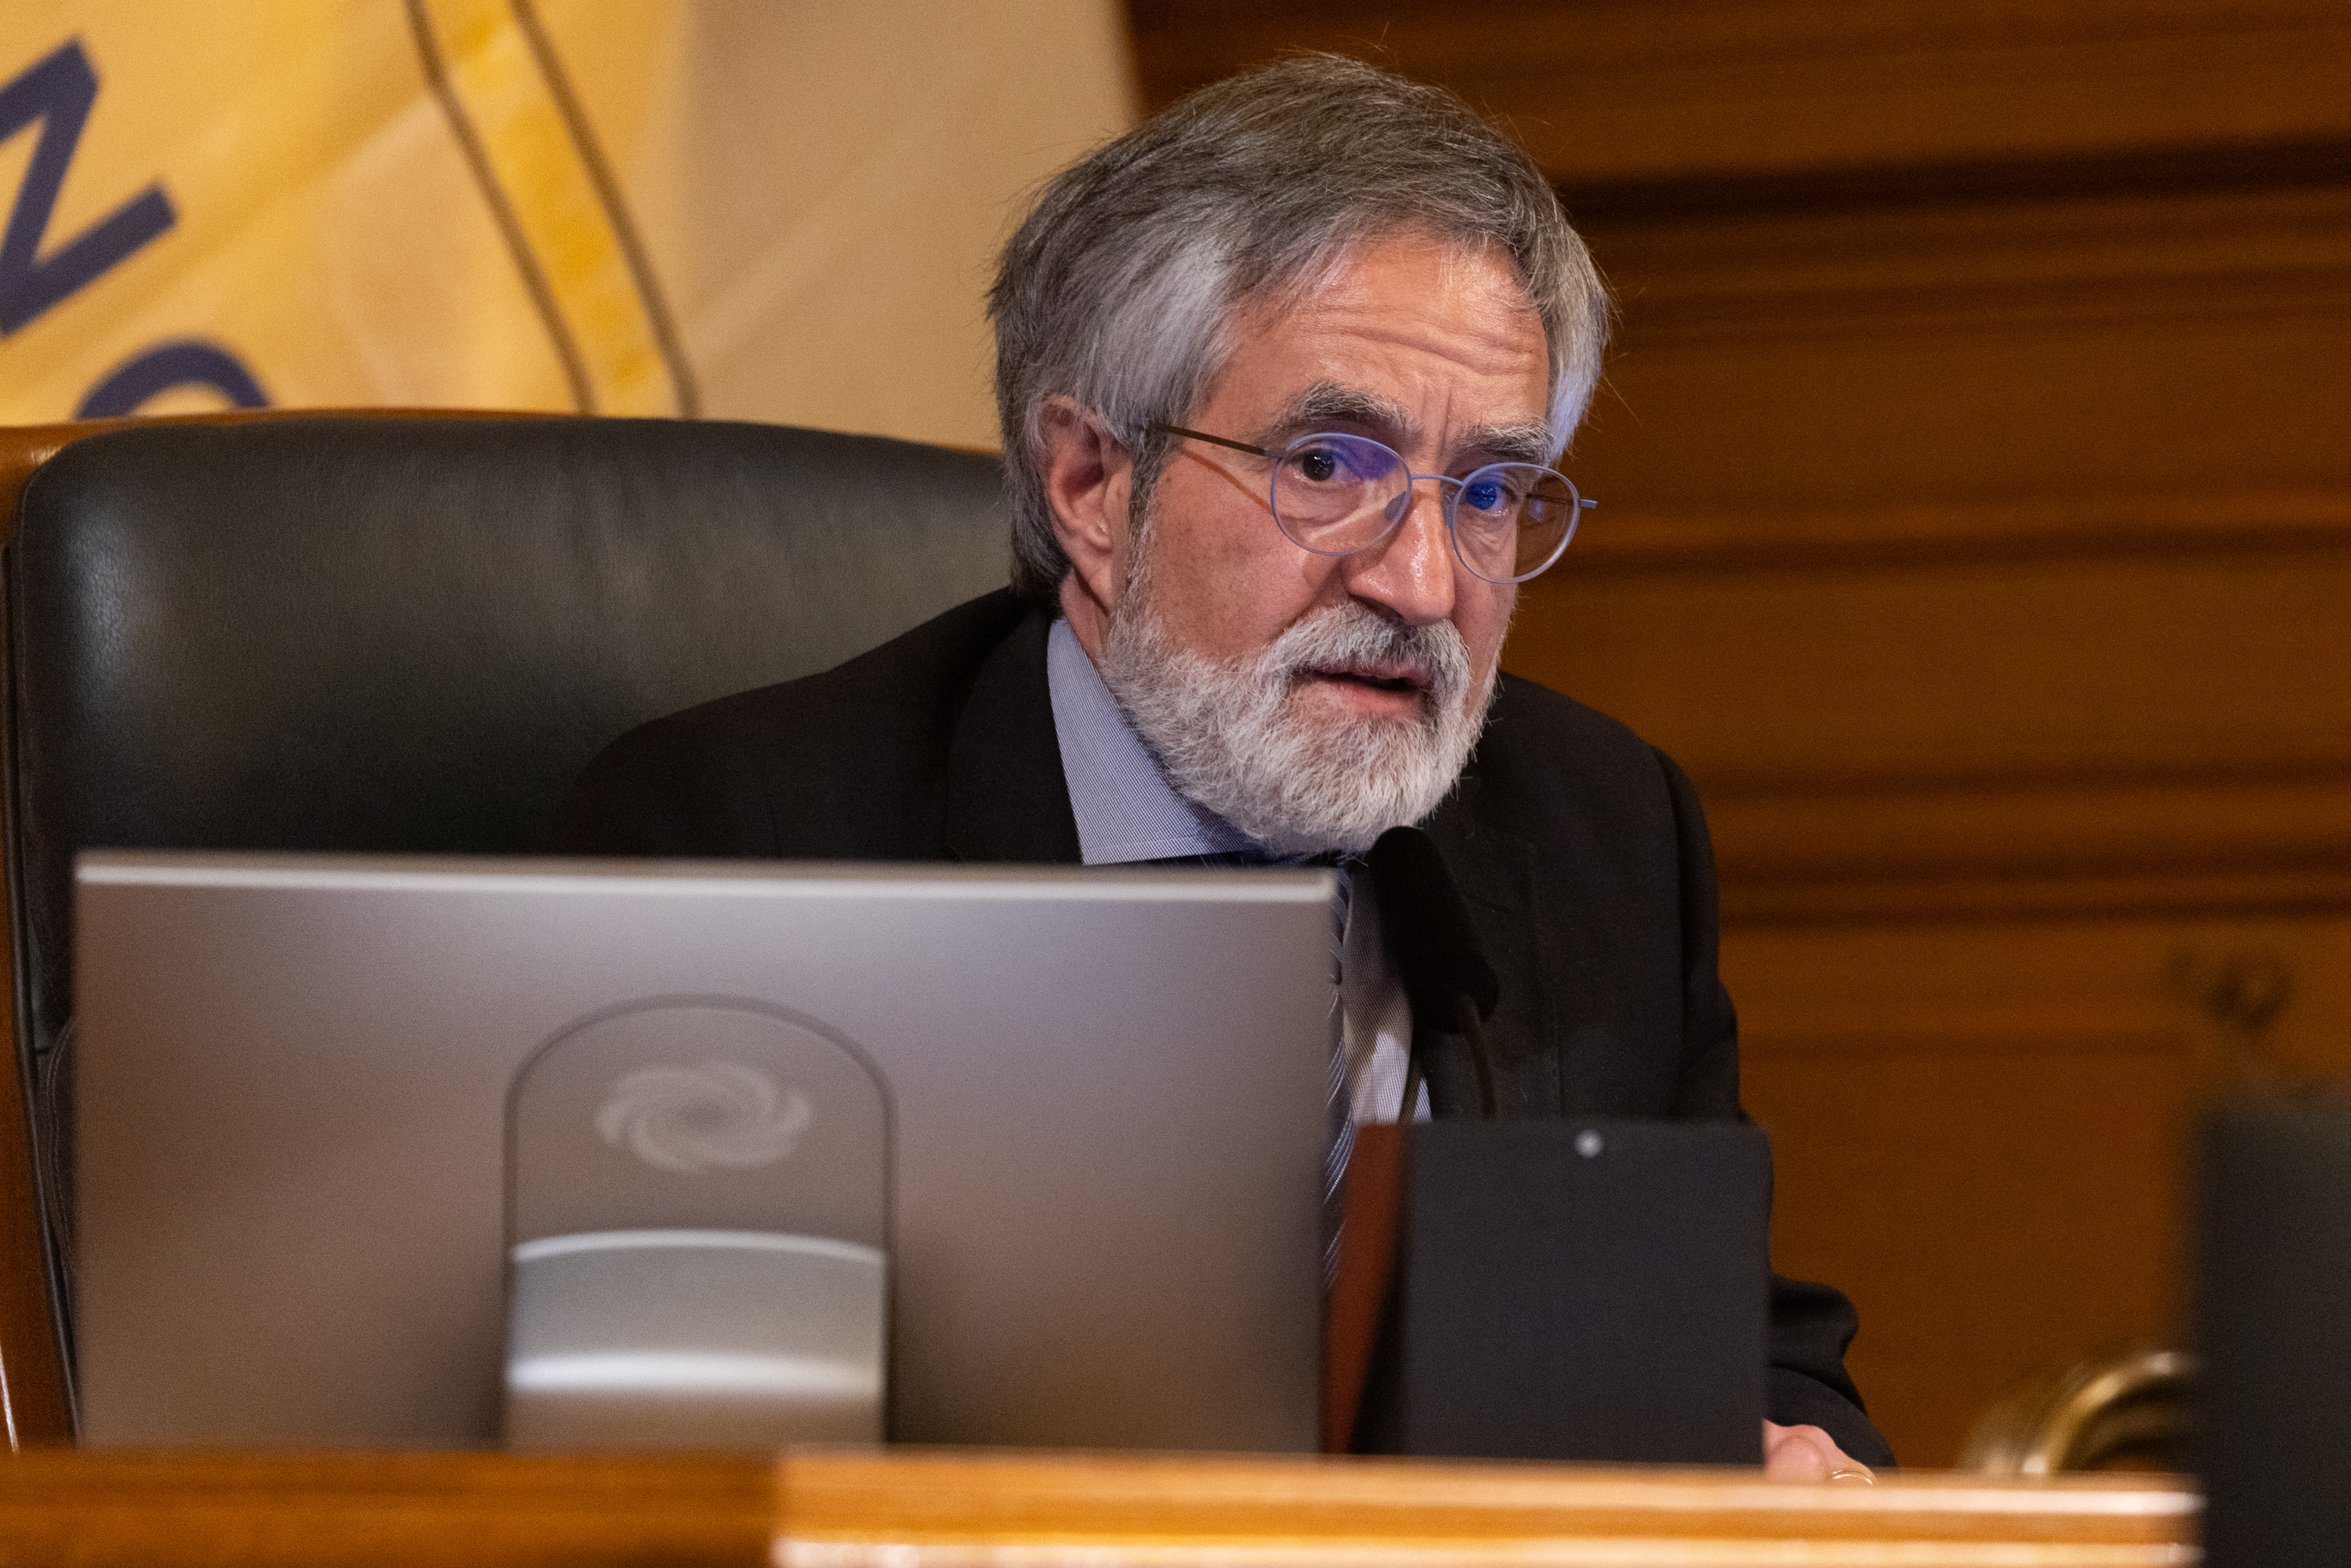 Supervisor Aaron Peskin looks forward in a suit at his chair during the Board of Supervisors public comment at city hall.